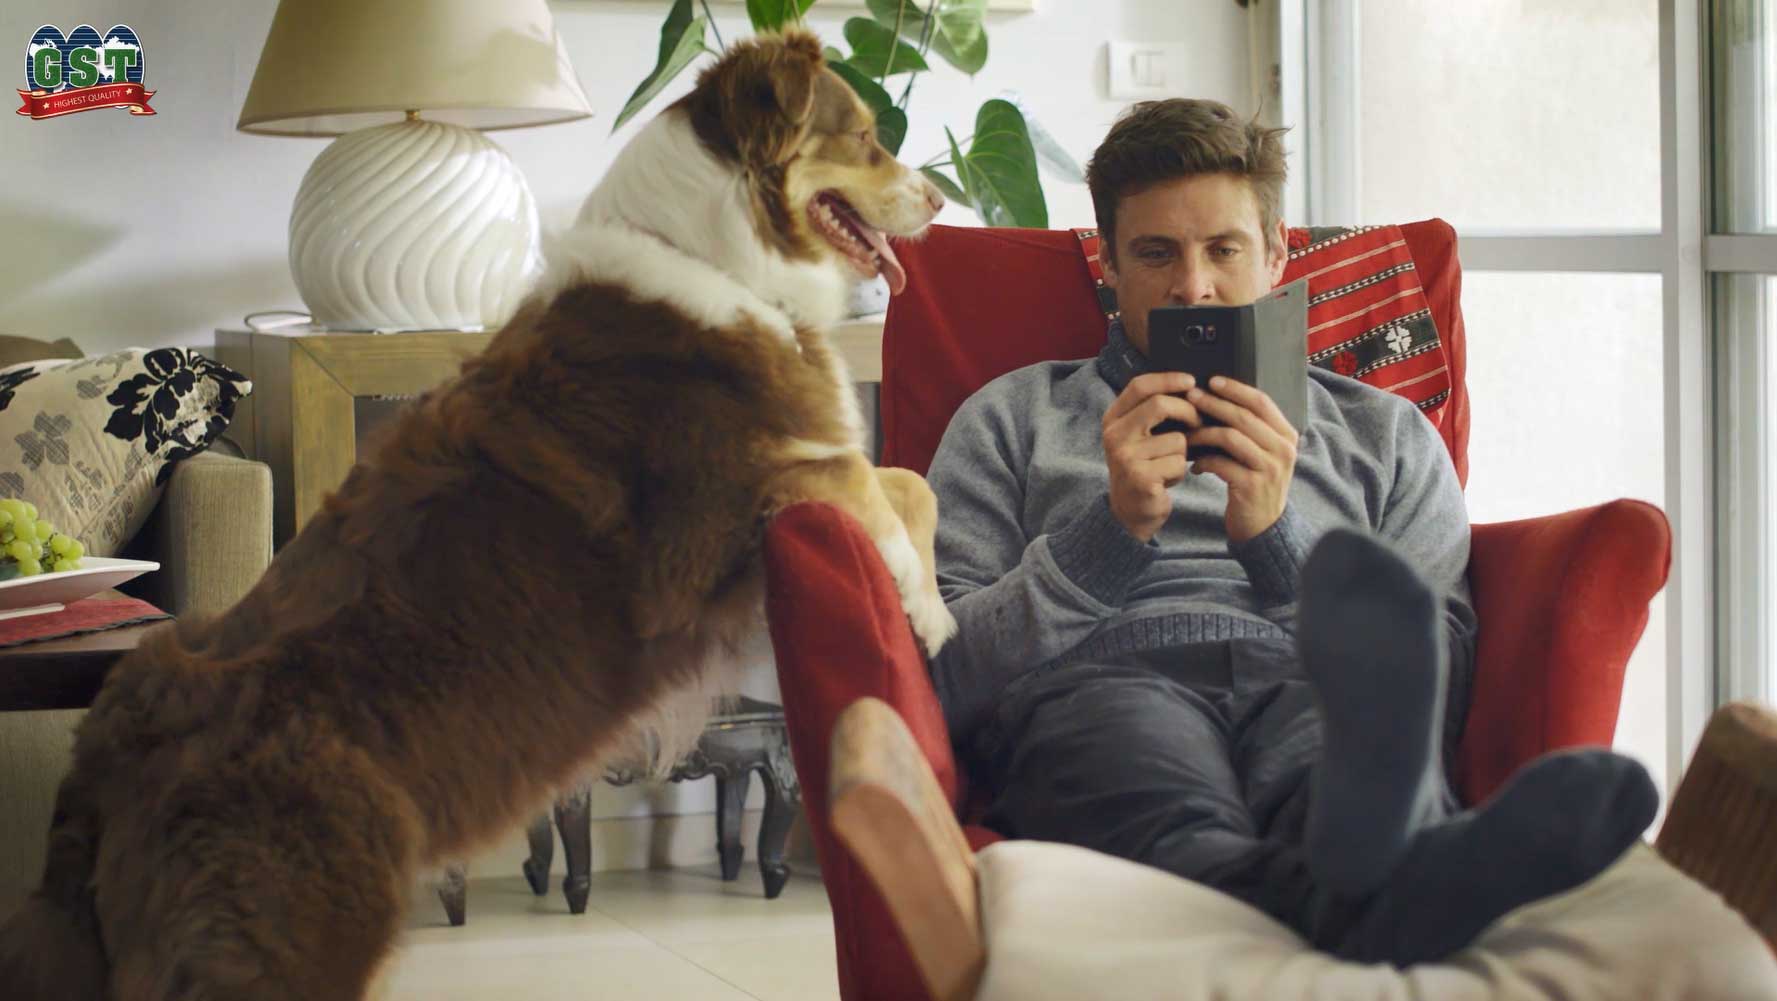 Man sitting in a chair buying online and a big dog